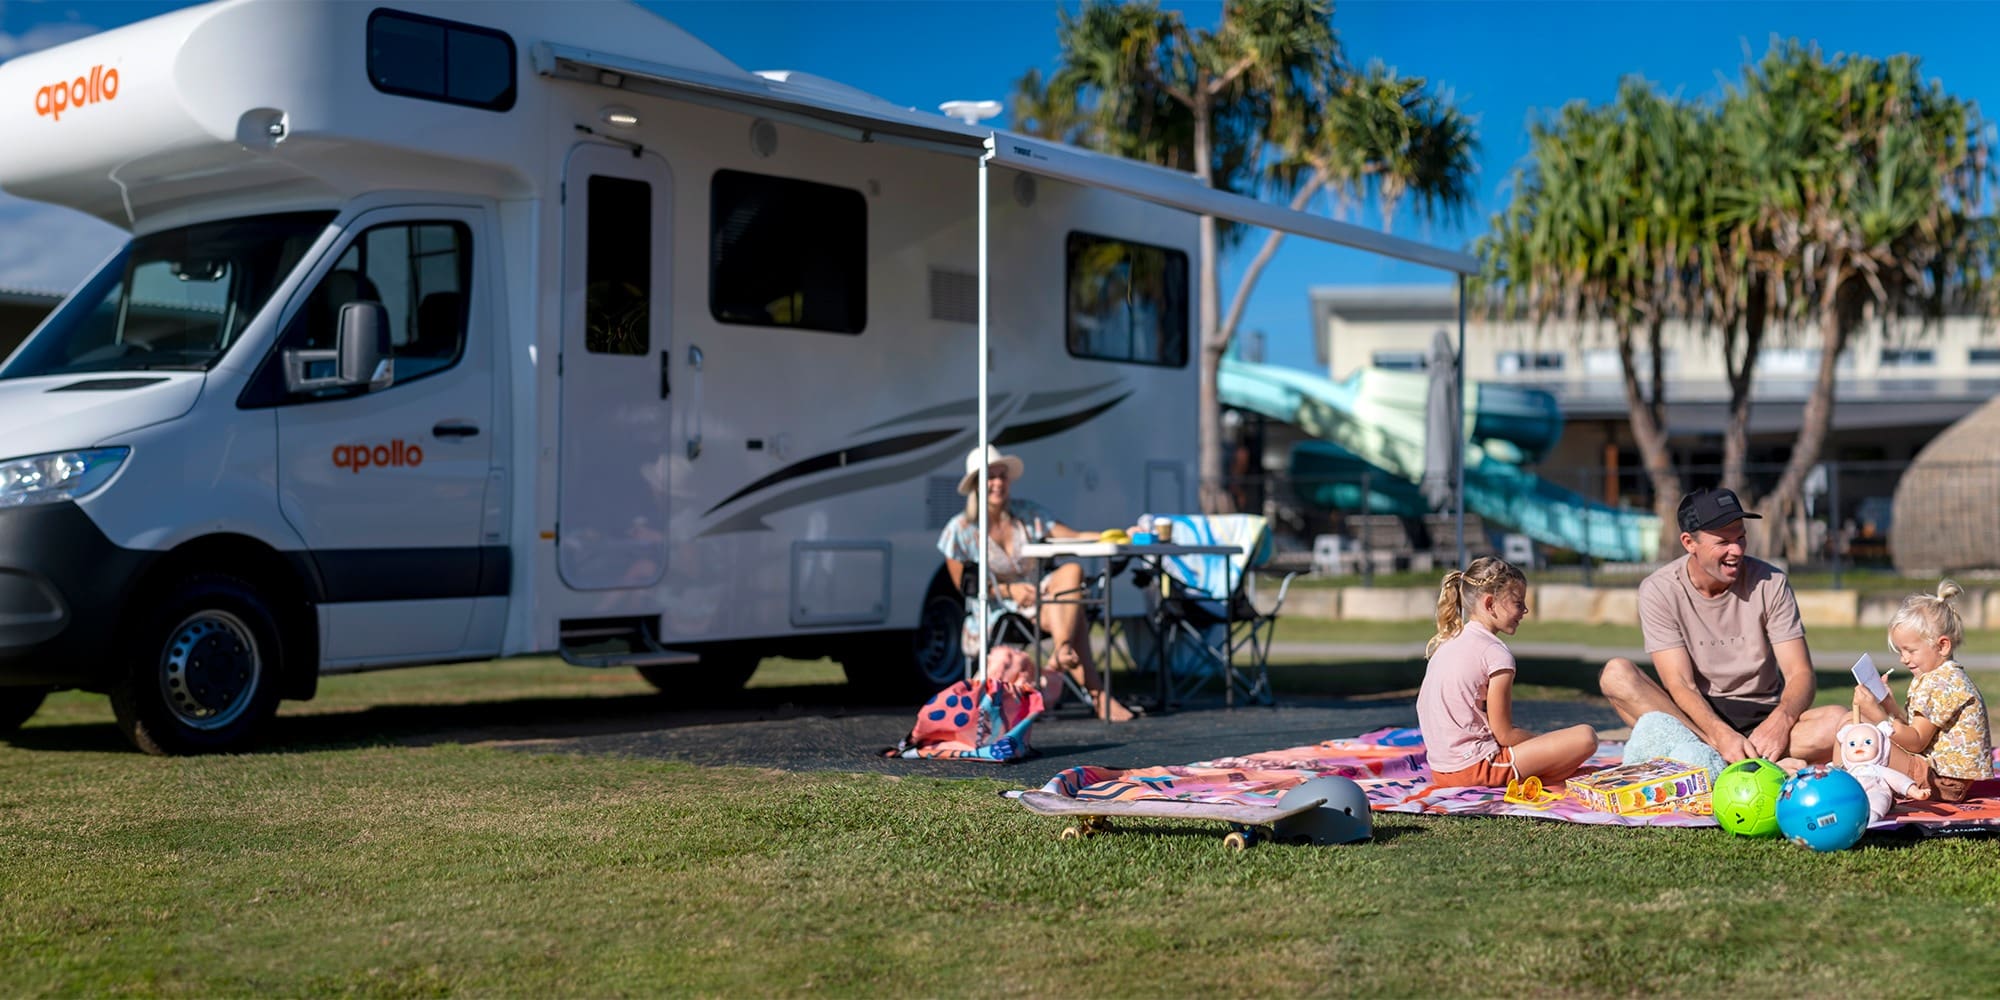 Top 5 reasons to choose a campervan holiday